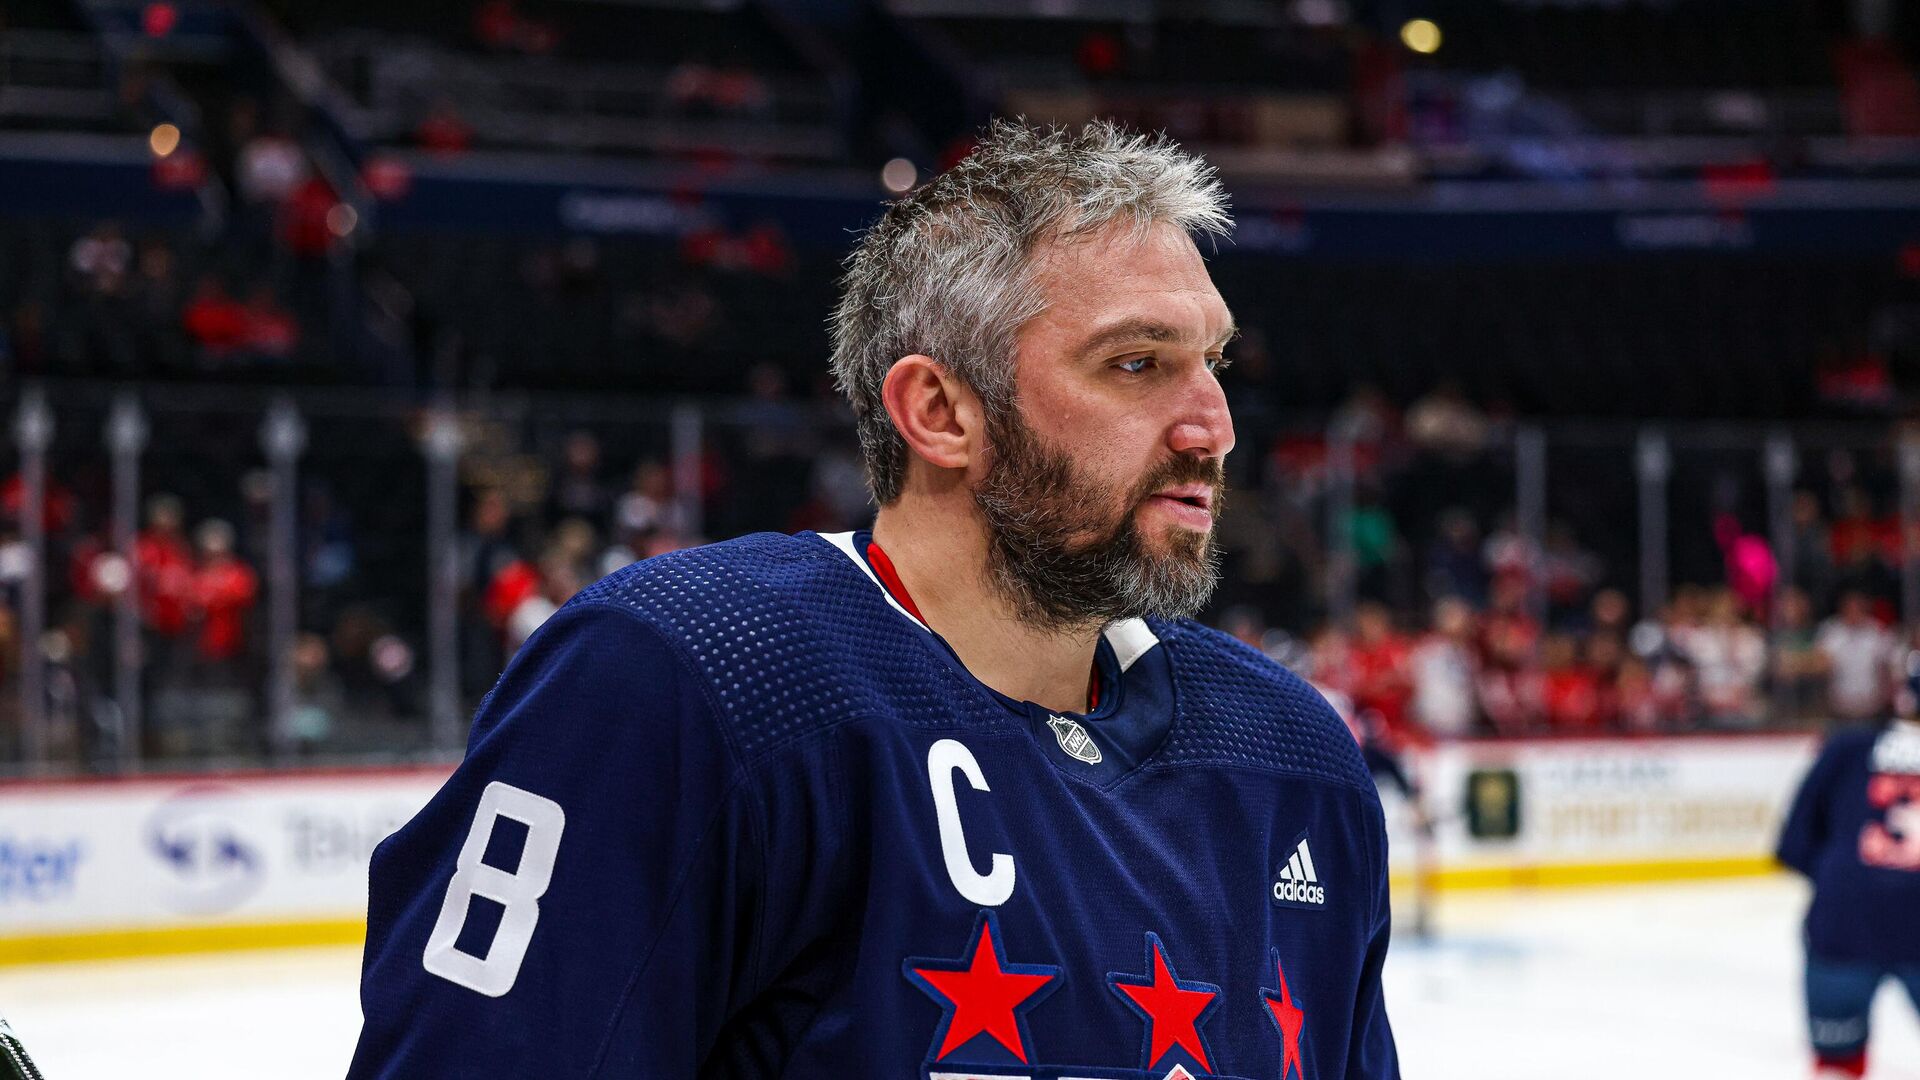 Ovechkin said injuries prevented the team from reaching the NHL playoffs.